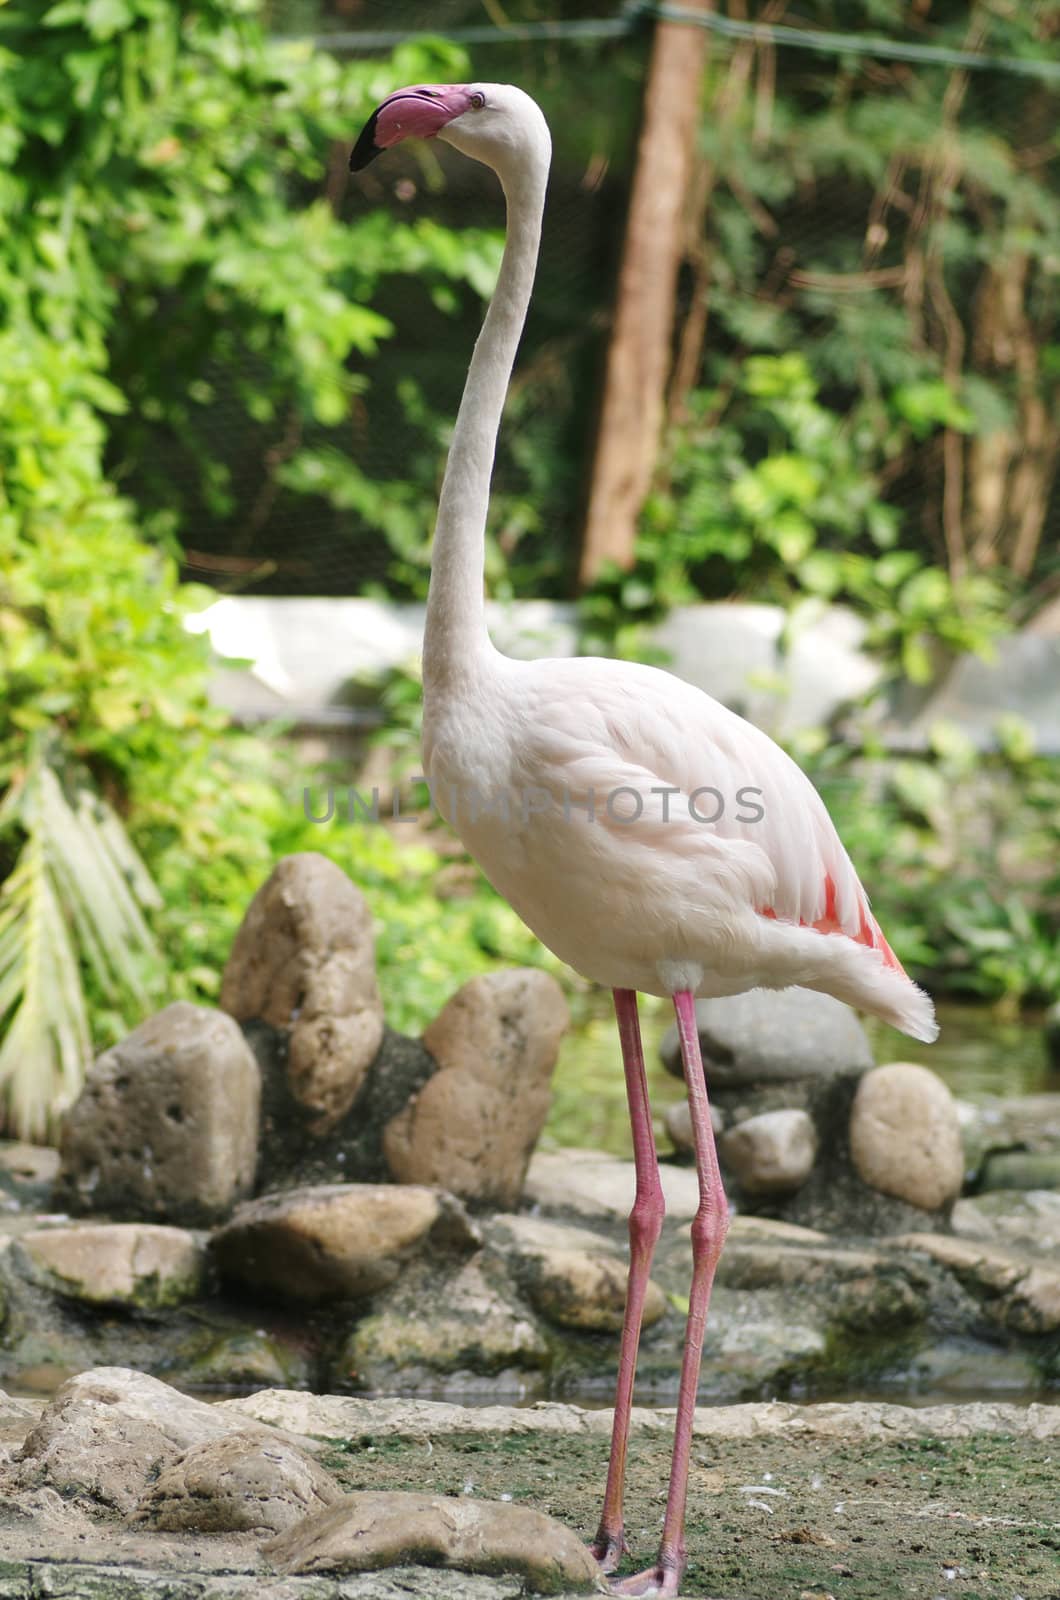 Flamingo live  in the Thailand nature zoo